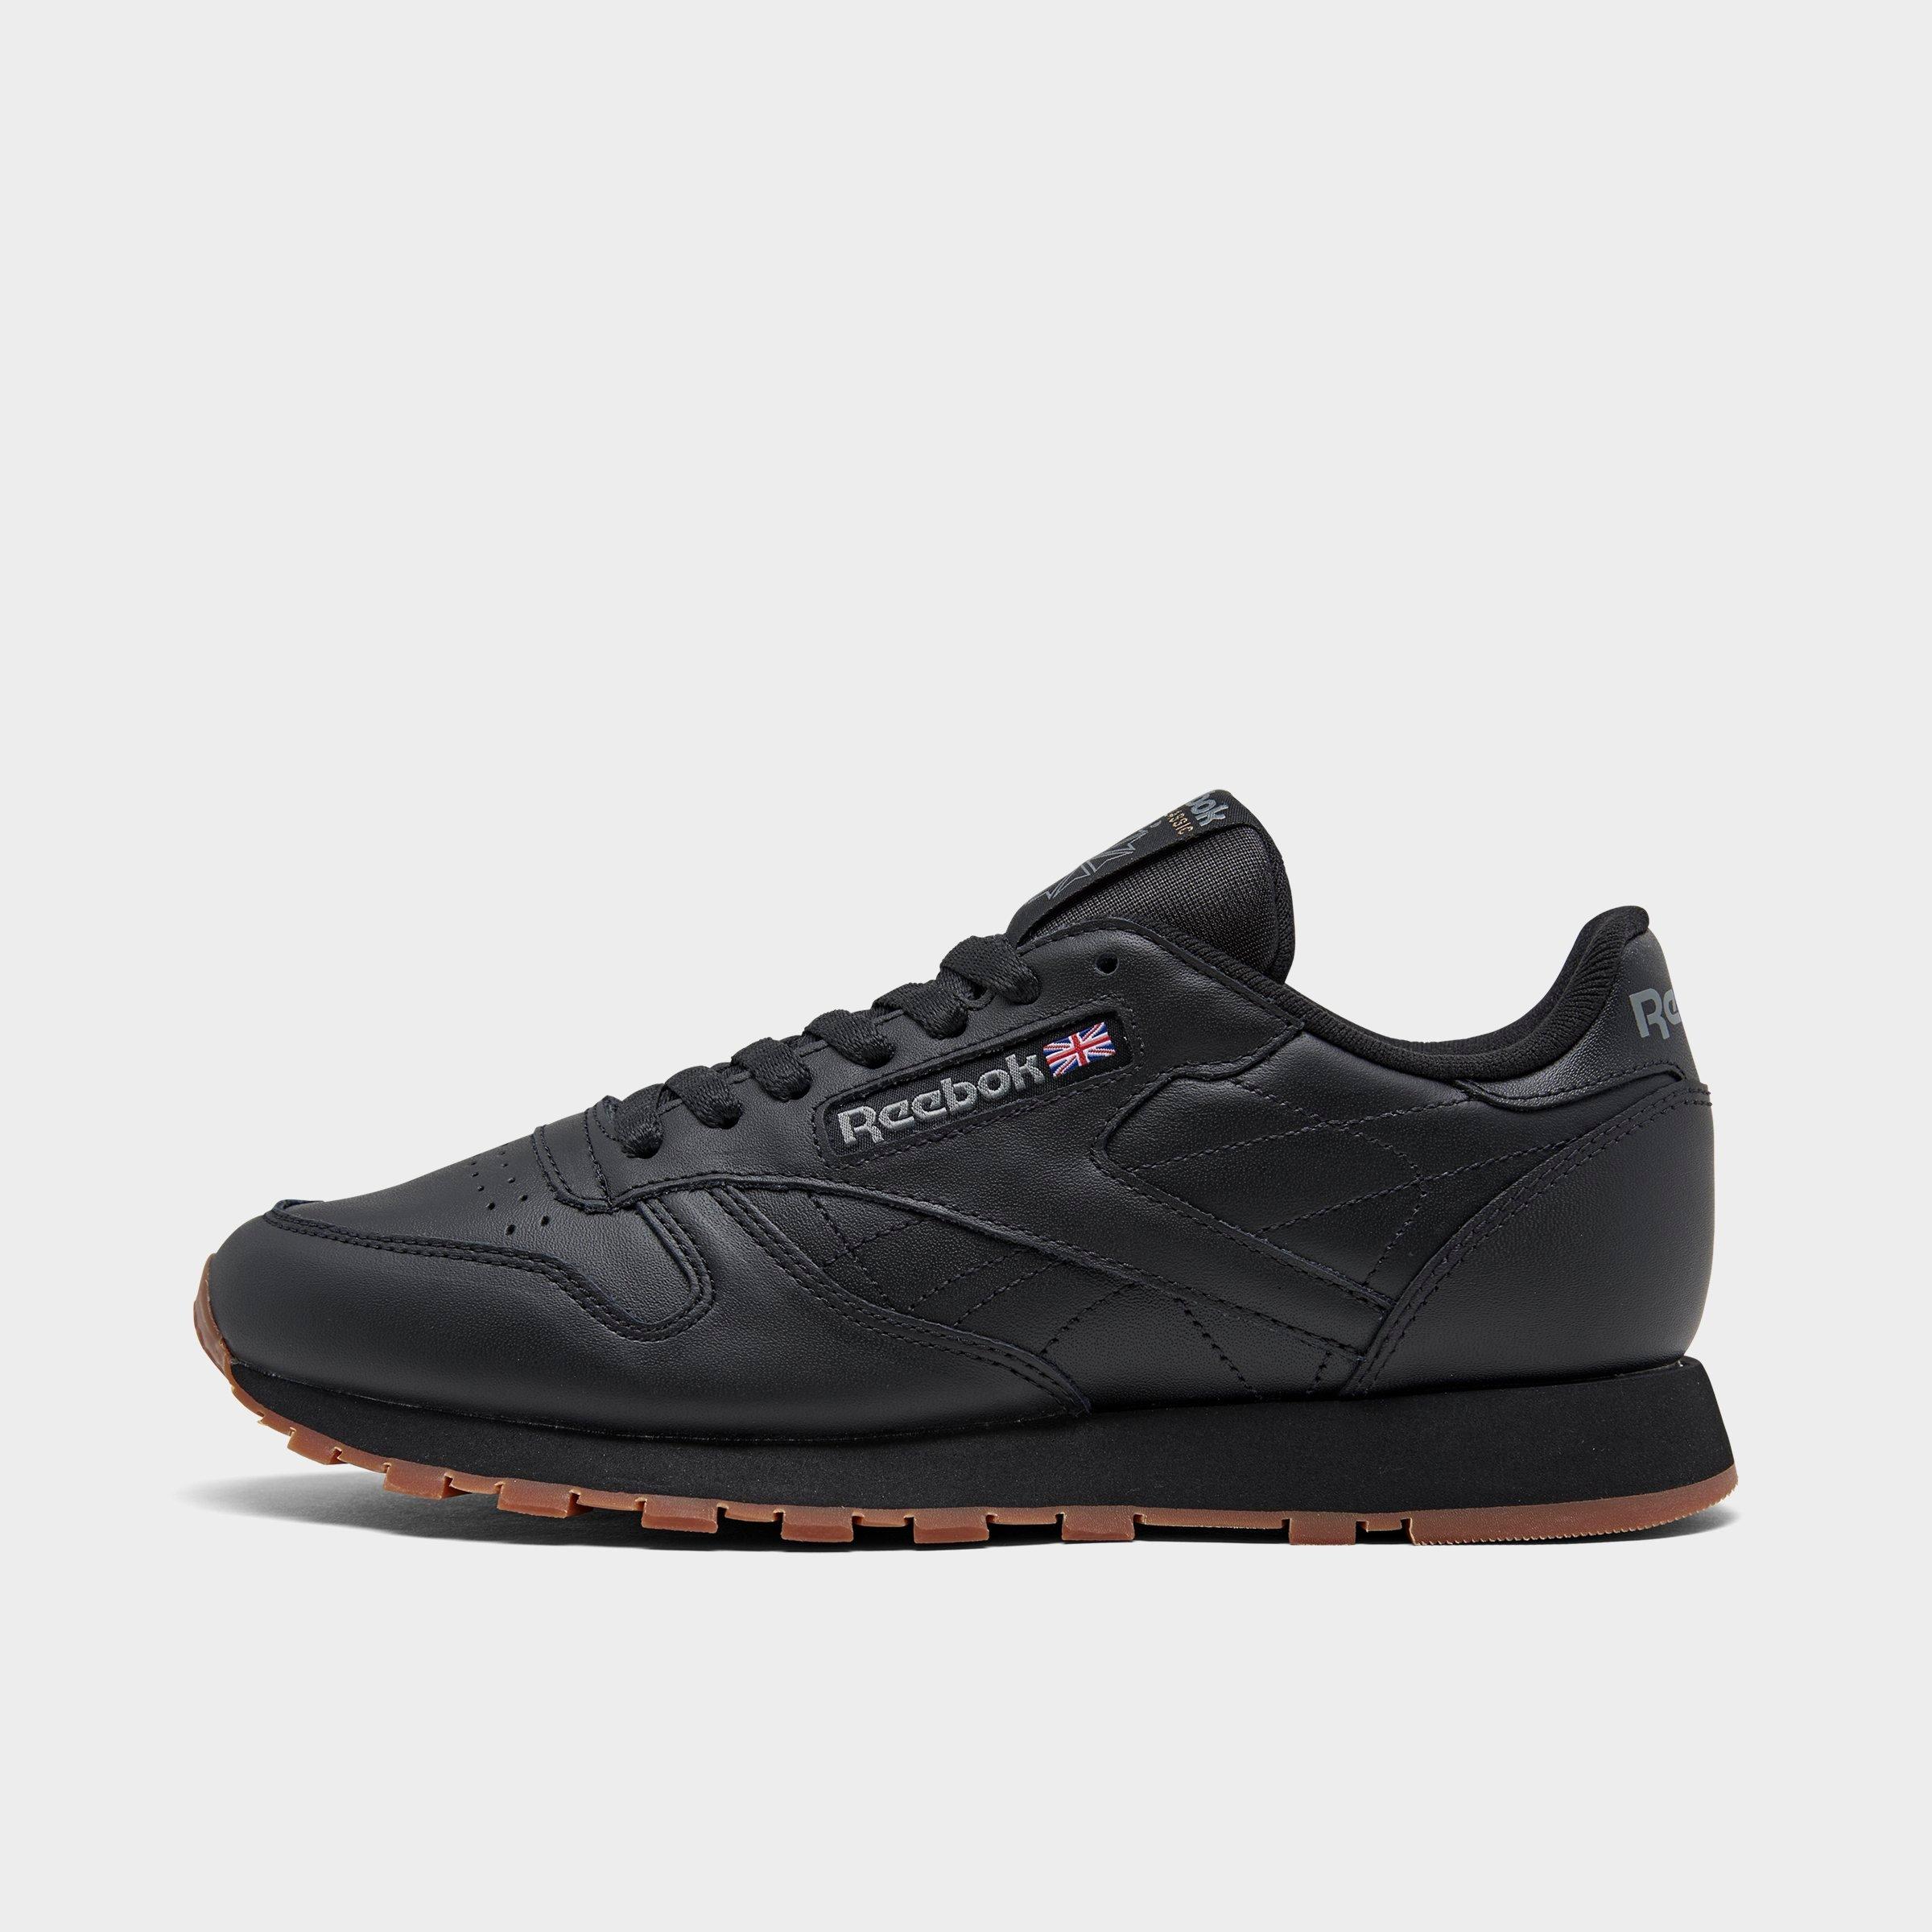 Men's Reebok Classic Leather Gum Casual Shoes| JD Sports